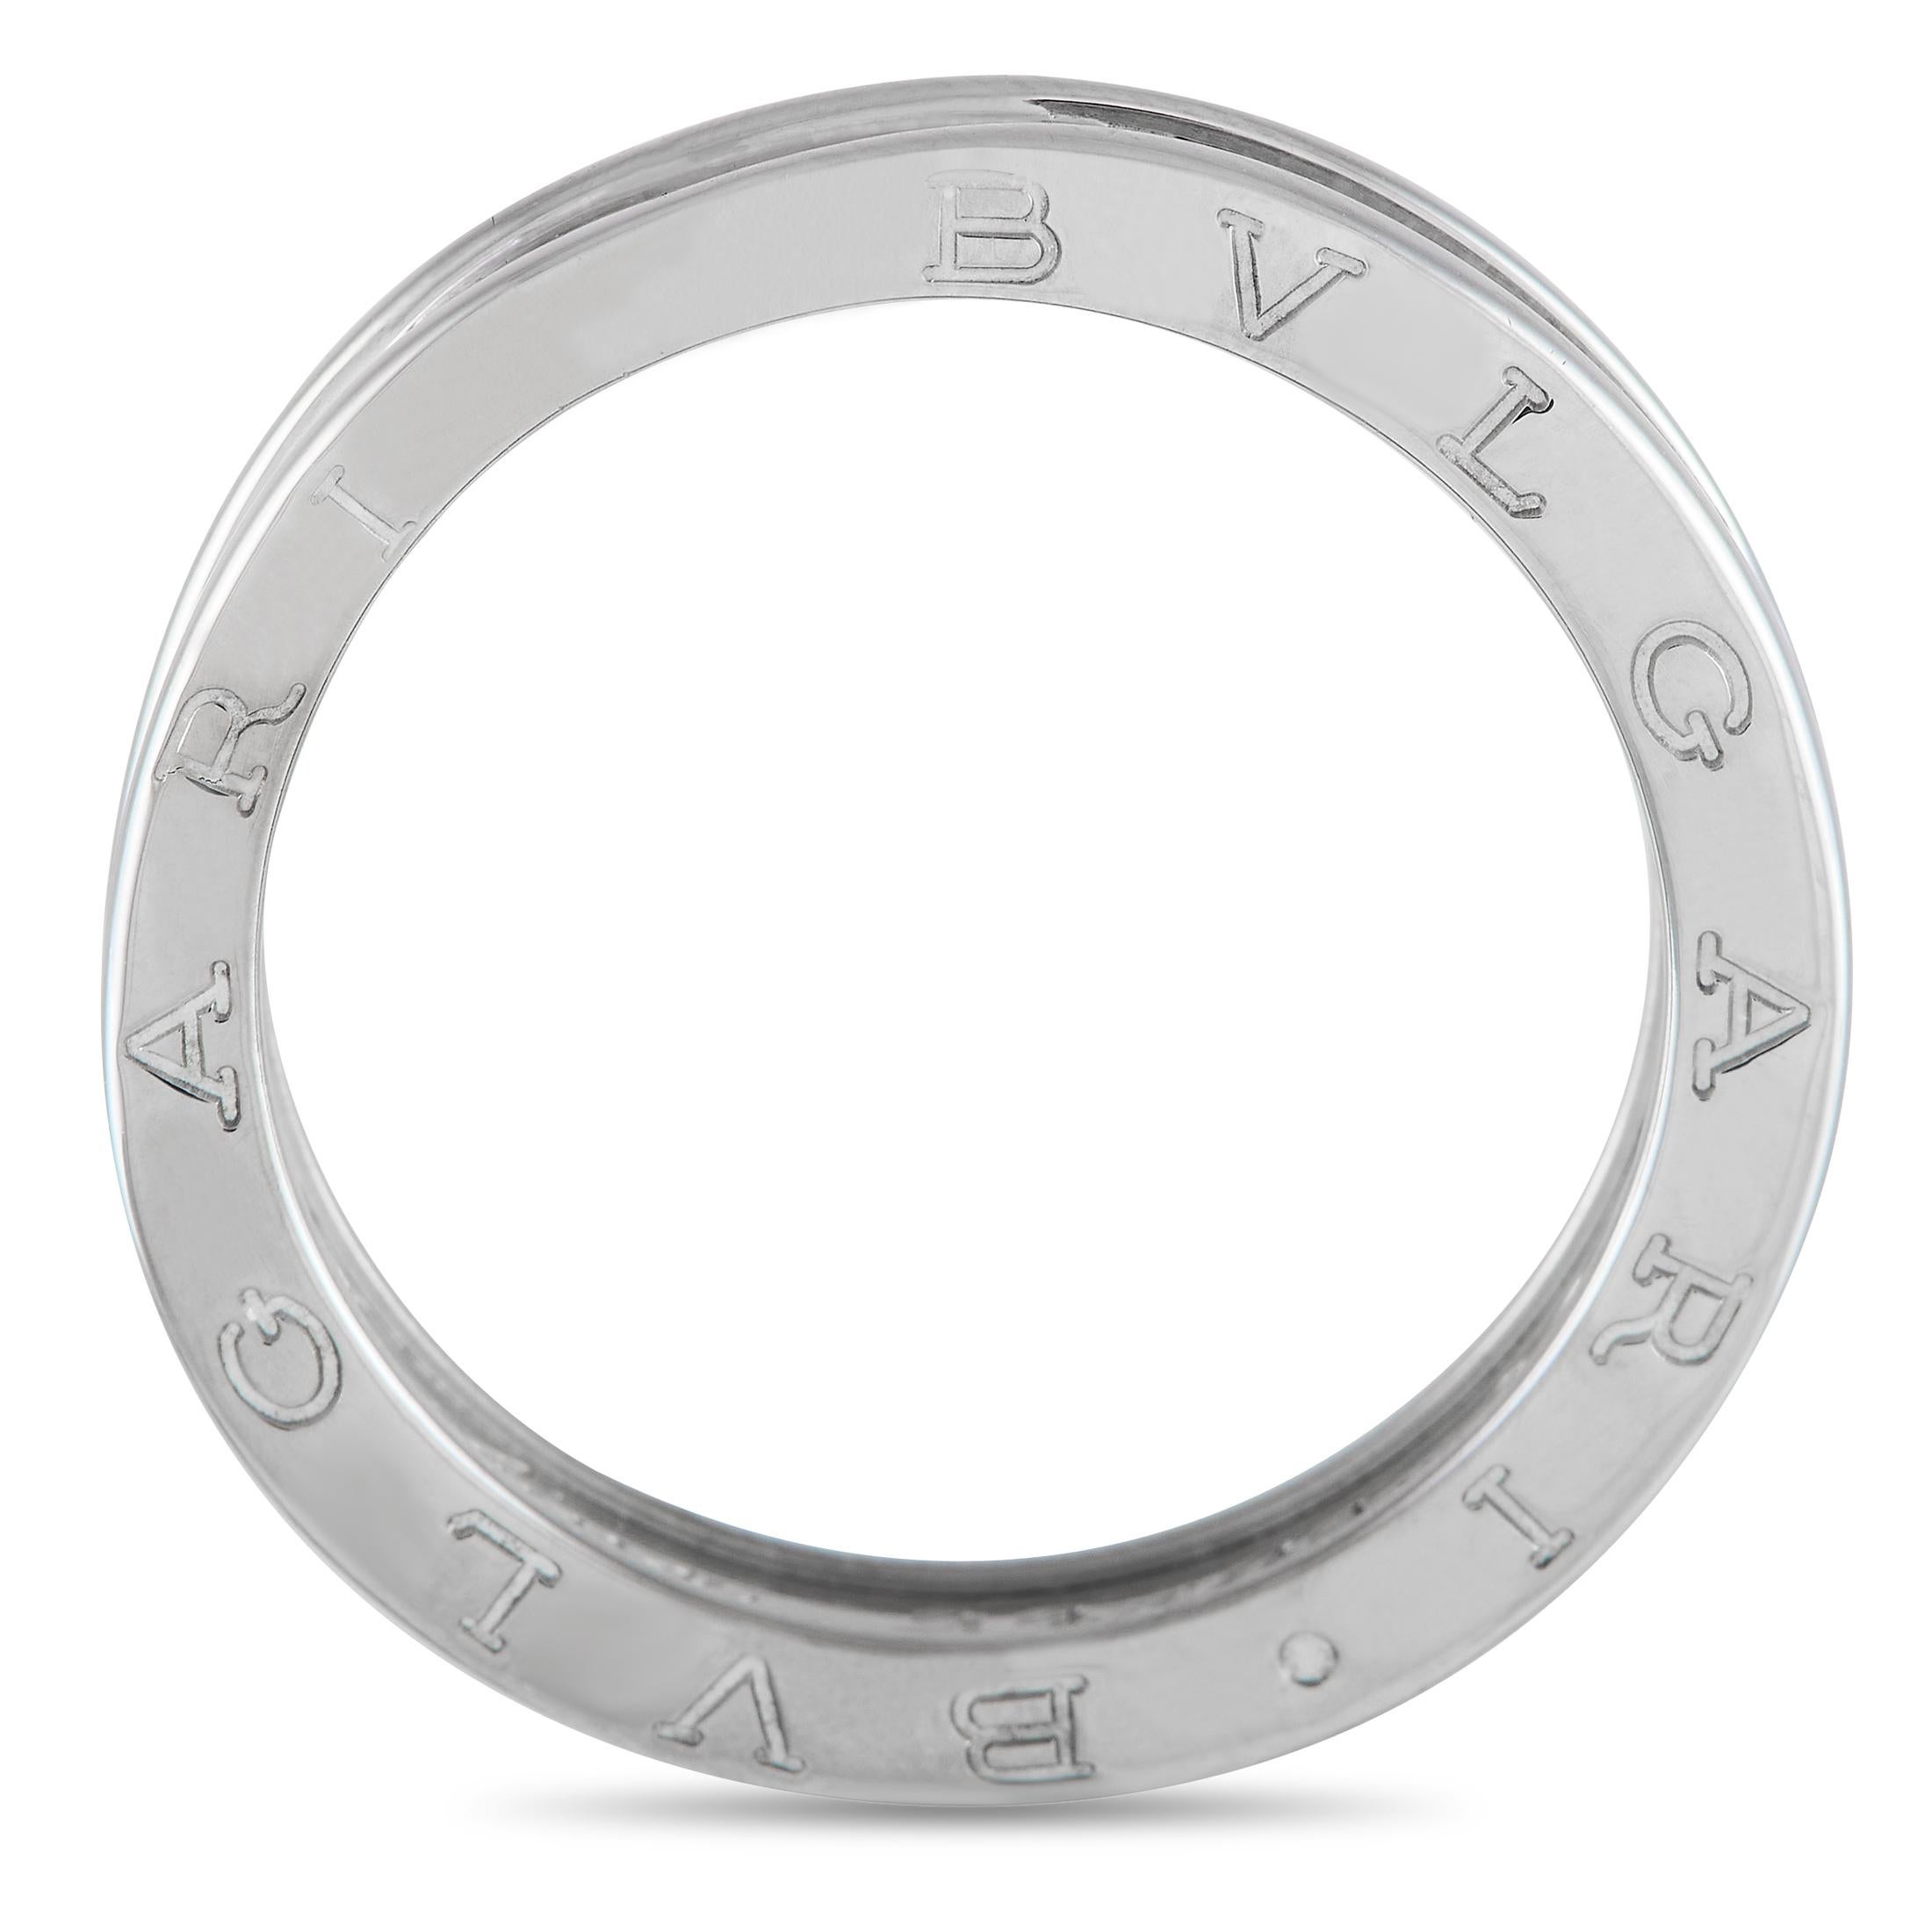 A simple yet bold ring suitable for all genders. The Bvlgari B.zero1 one-band ring is exquisitely crafted in 18K white gold. Its design is inspired by the curves and circular silhouette of the Colosseum in Rome. The band is engraved with the iconic